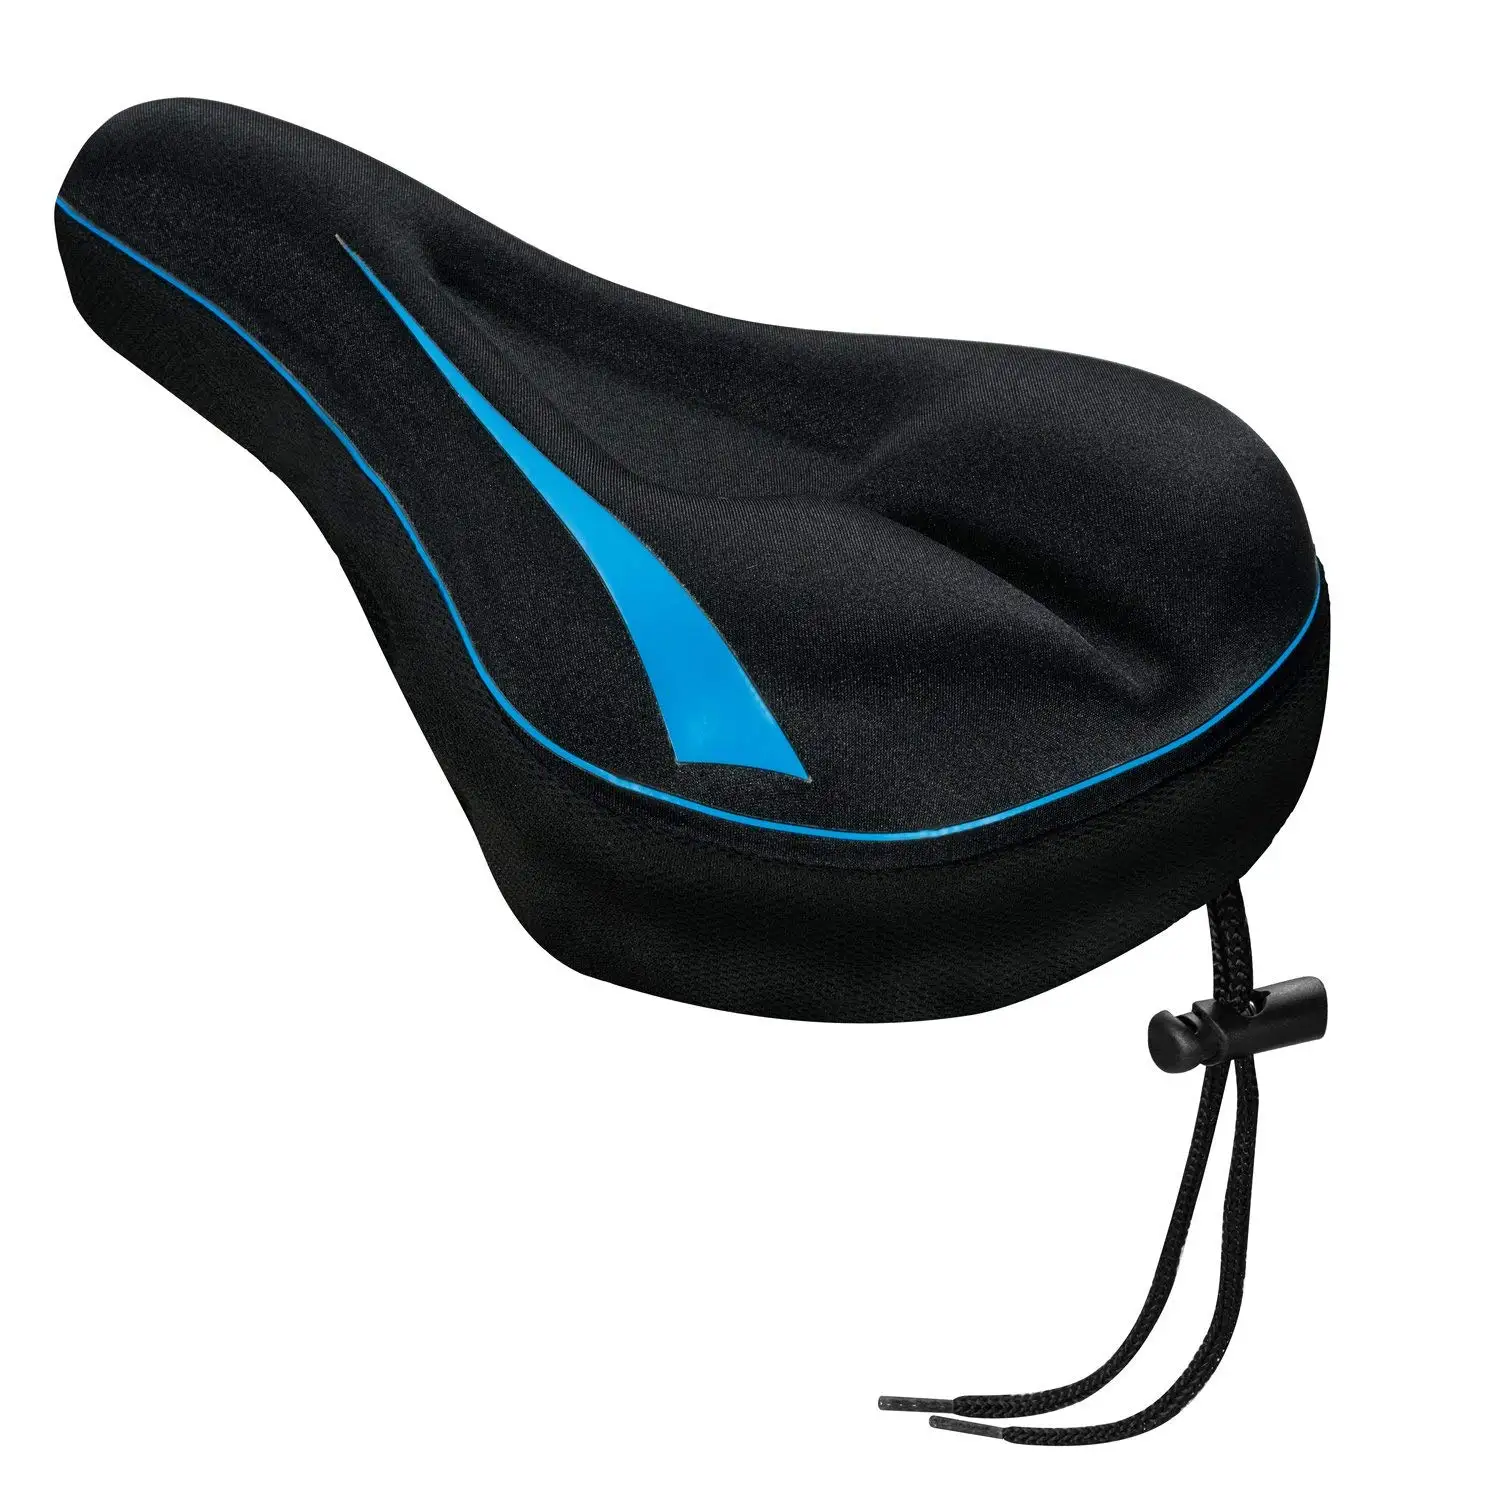 bike seat pad for spinning